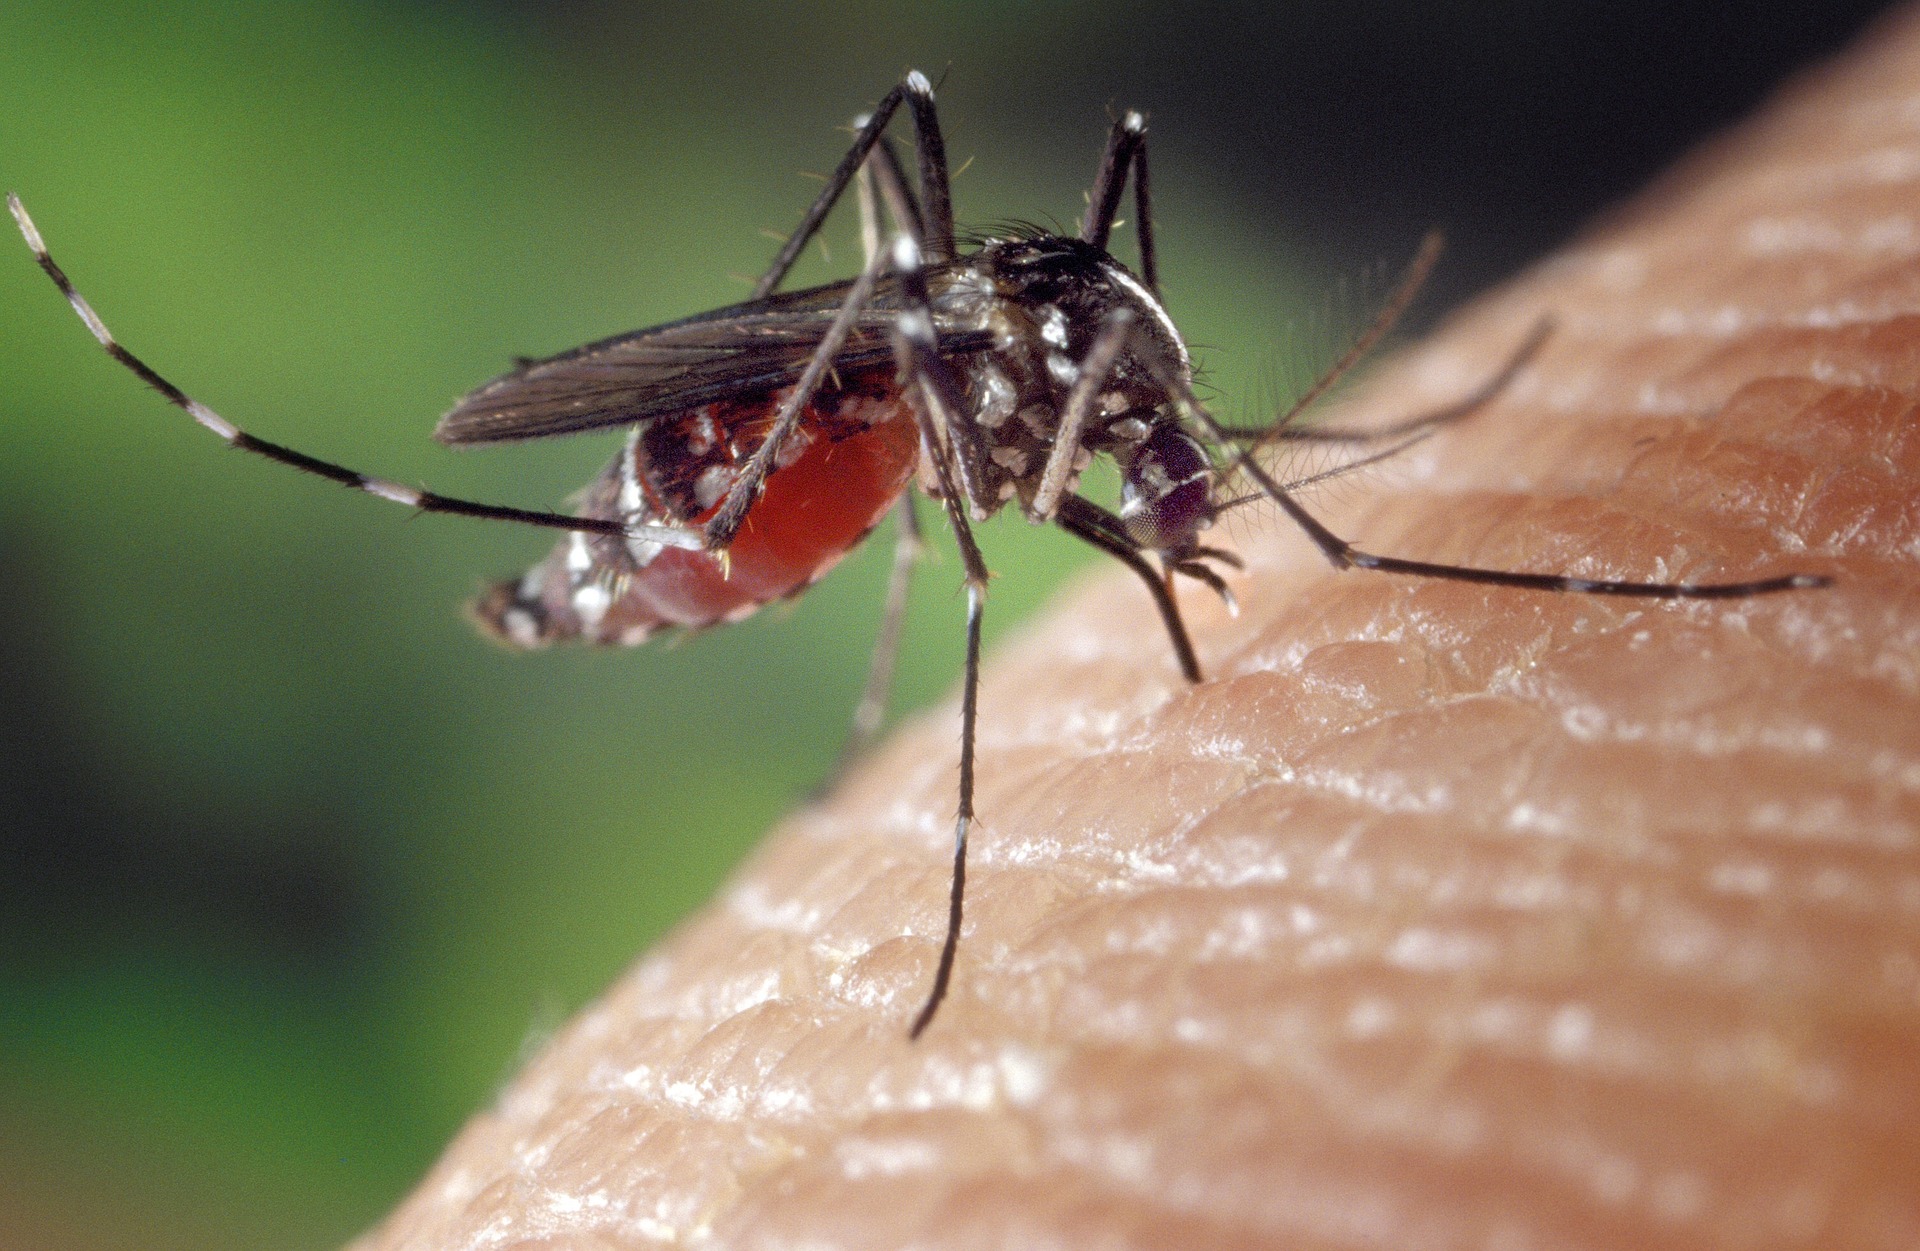 NH DHHS Identifies Season’s First Positive Test for West Nile Virus in Mosquito Batch in Manchester